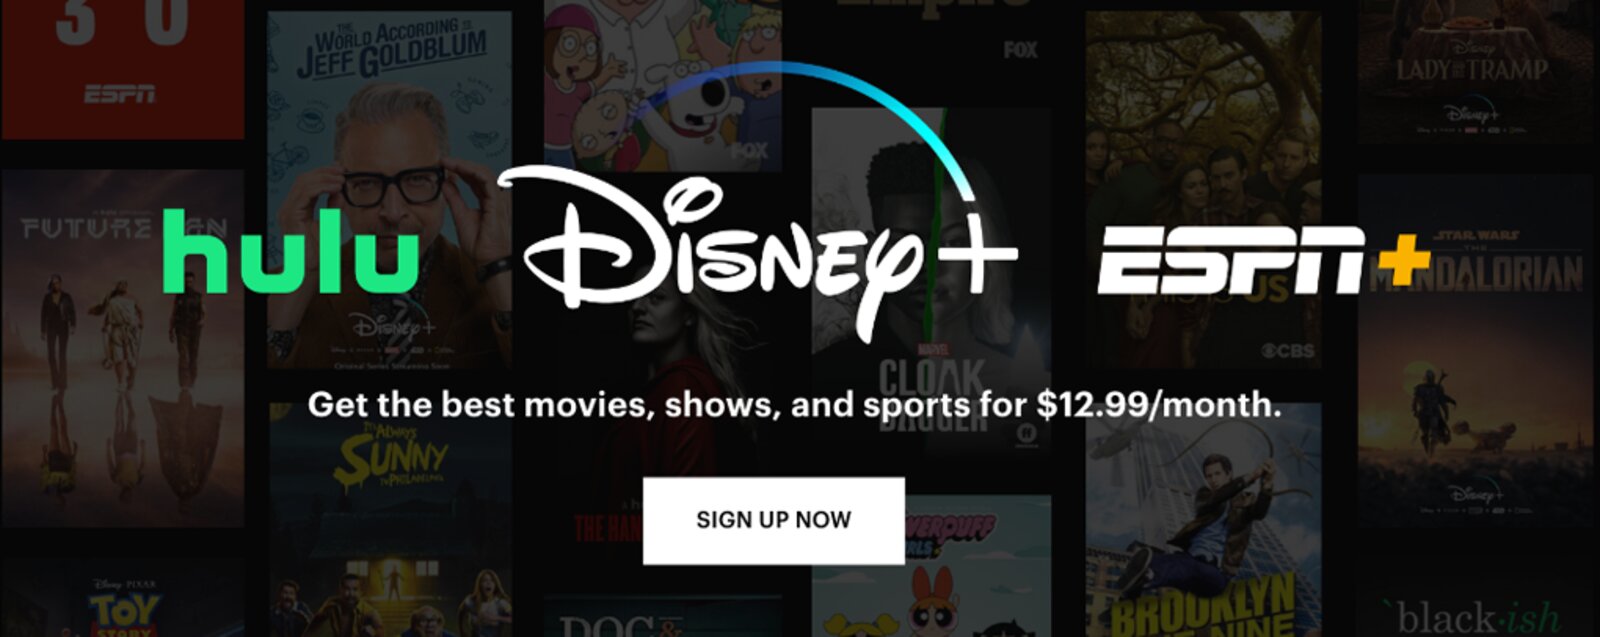 Is the Disney Plus/Hulu bundle worth it? Here's what the deal gets you